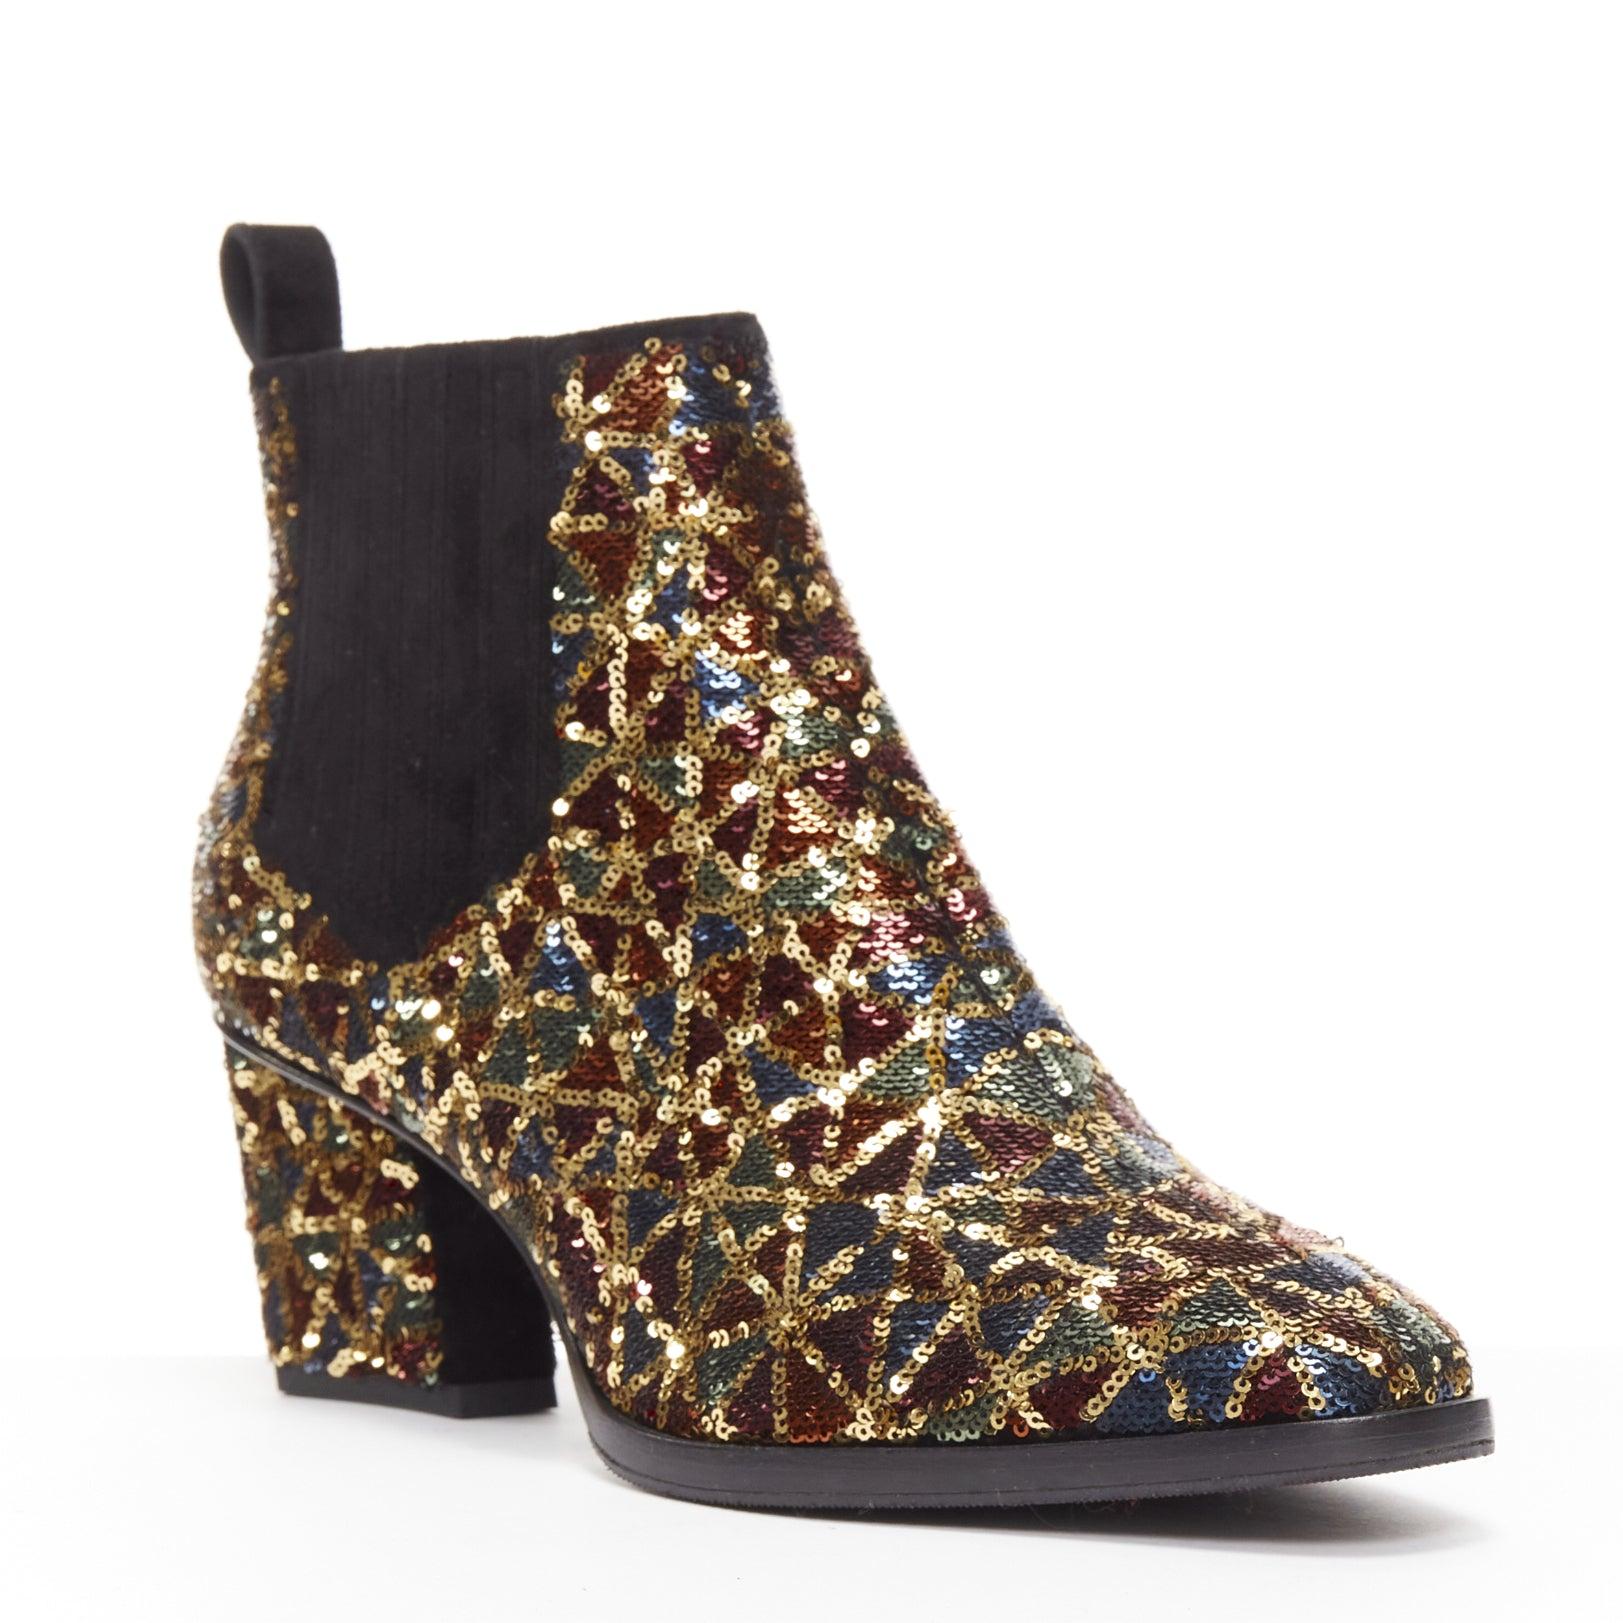 ROGER VIVIER Skyscraper gold geometric sequins block heel ankle boot EU37
Reference: NKLL/A00115
Brand: Roger Vivier
Model: Skyscraper
Material: Leather
Color: Gold
Pattern: Geometric
Closure: Stretch Gusset
Lining: Gold Leather
Extra Details: Black